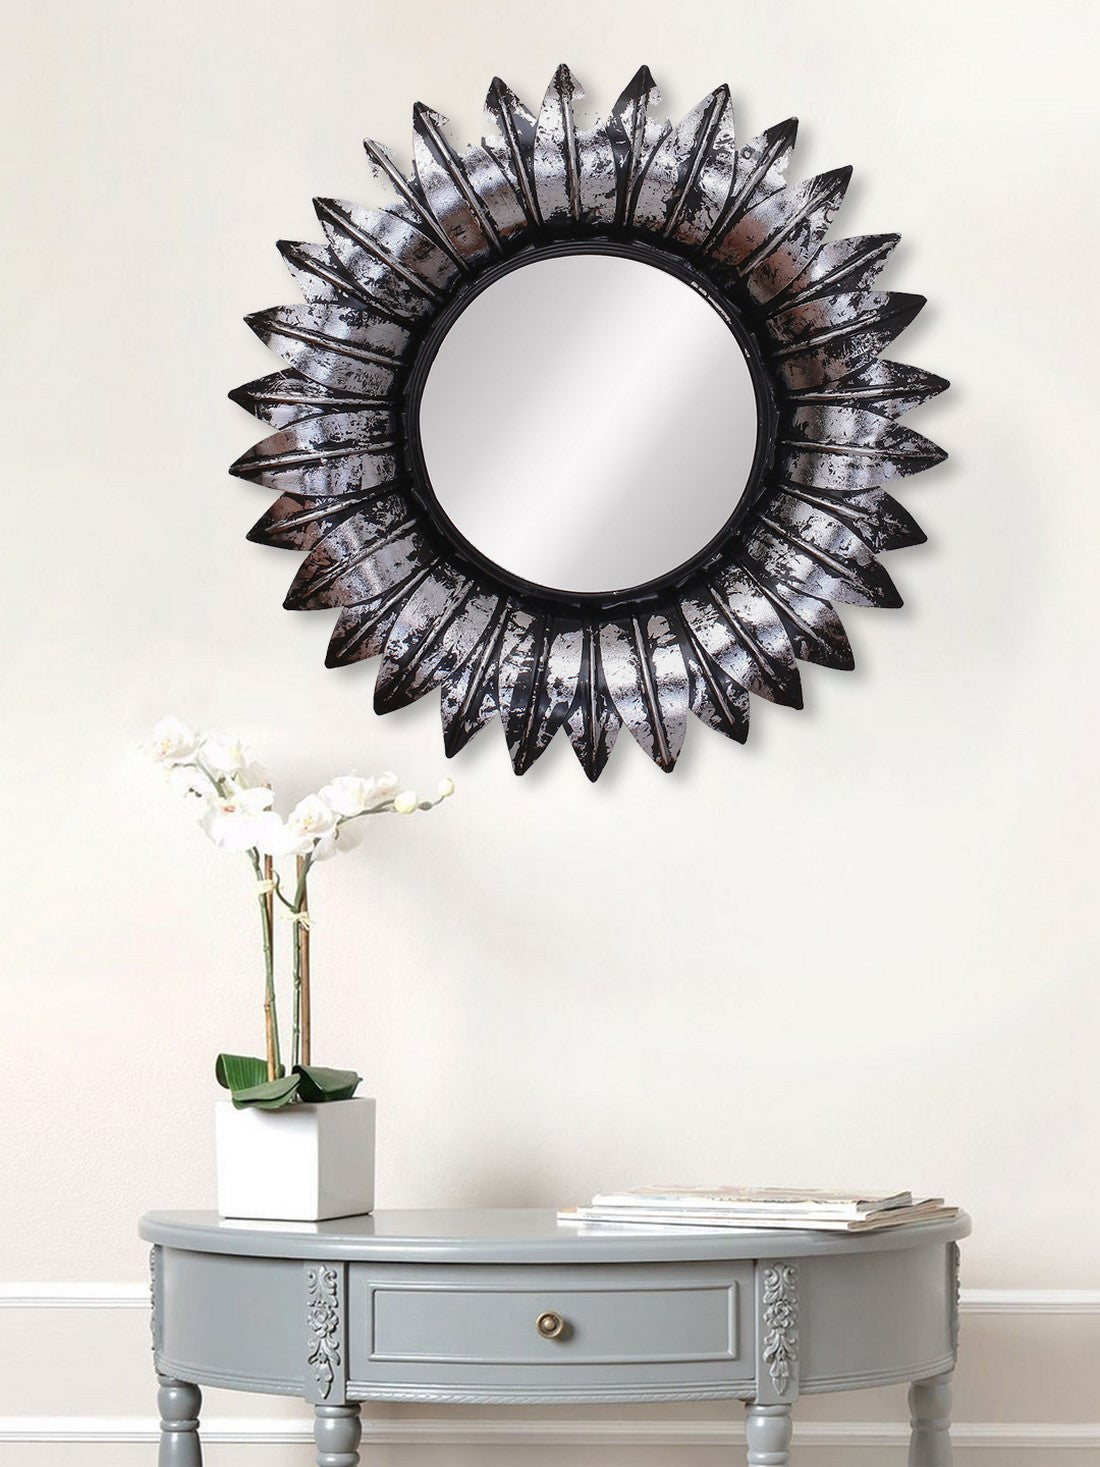 Grey and Black Decorative Metal Handcarved Wall Mirror